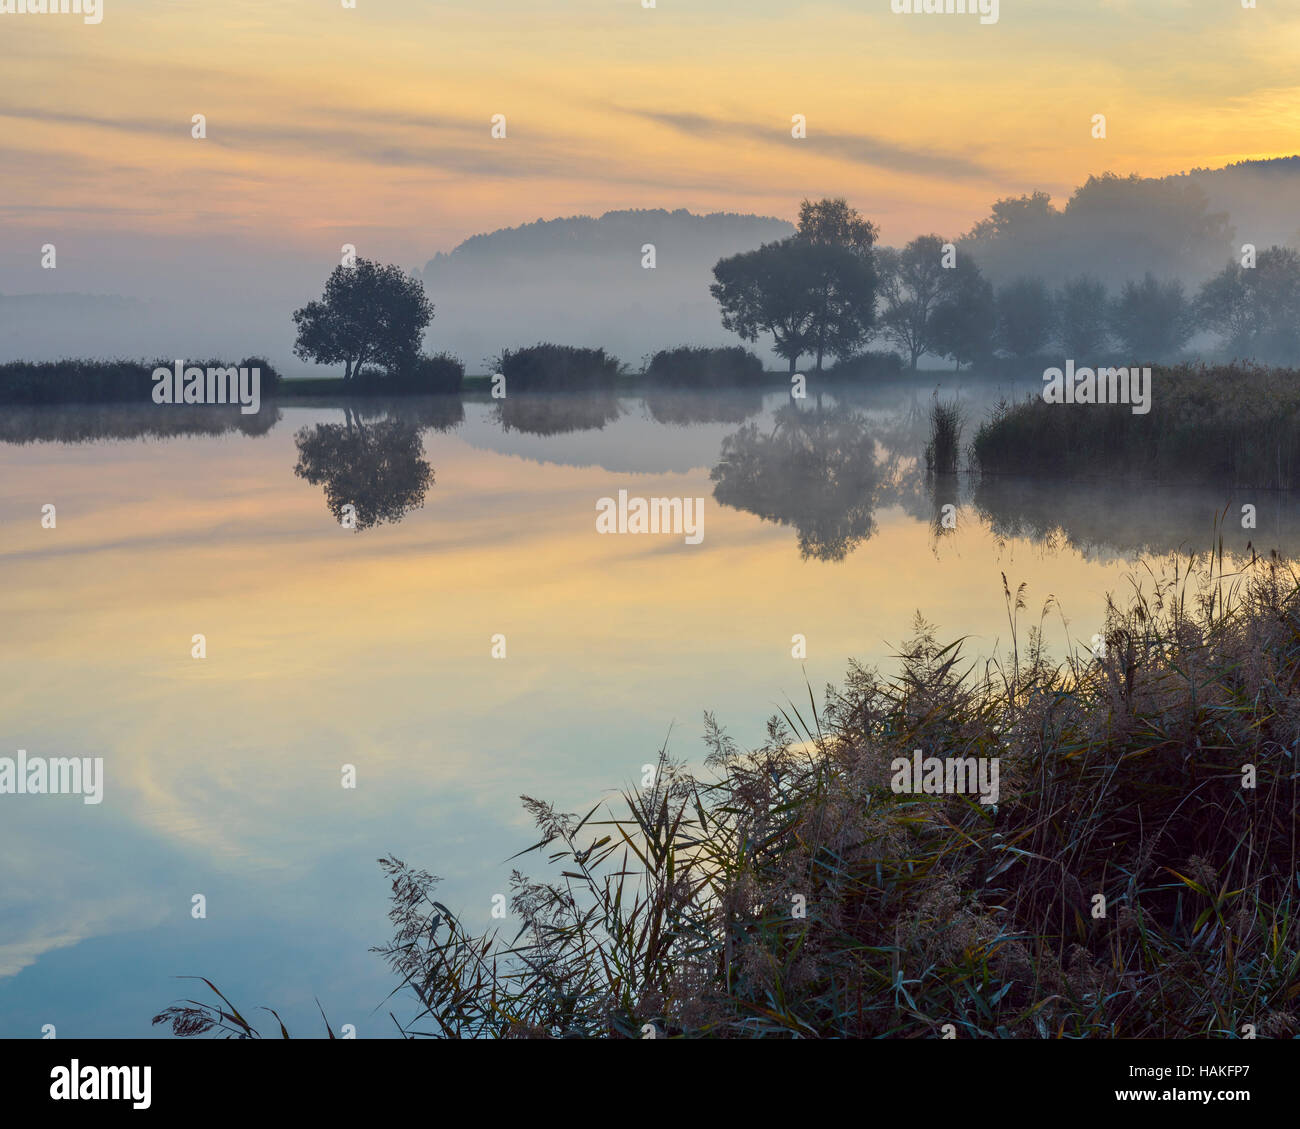 Landscape with Trees Reflecting in Lake at Dawn, Drei Gleichen, Ilm District, Thuringia, Germany Stock Photo